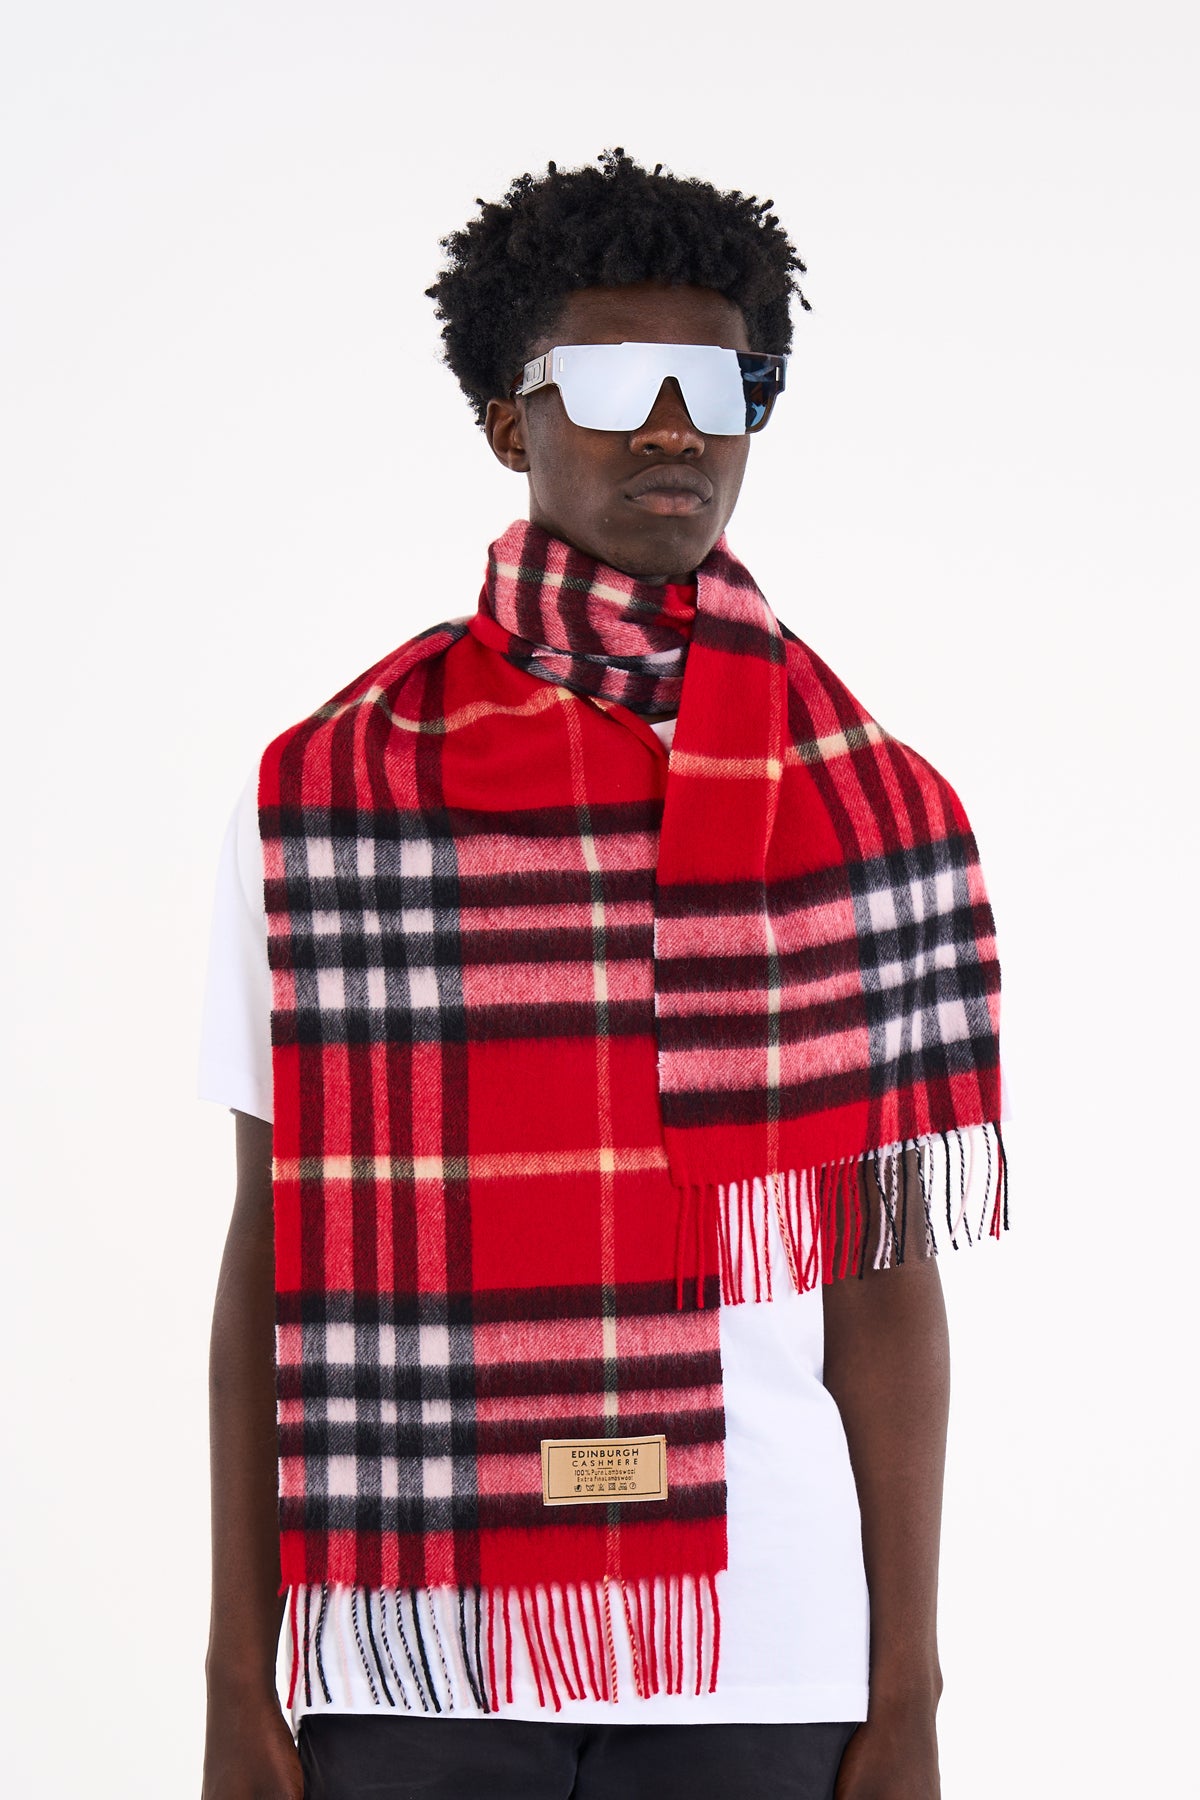 Scarf DC Classic Red Oversized Wrap 100% Pure Lambswool